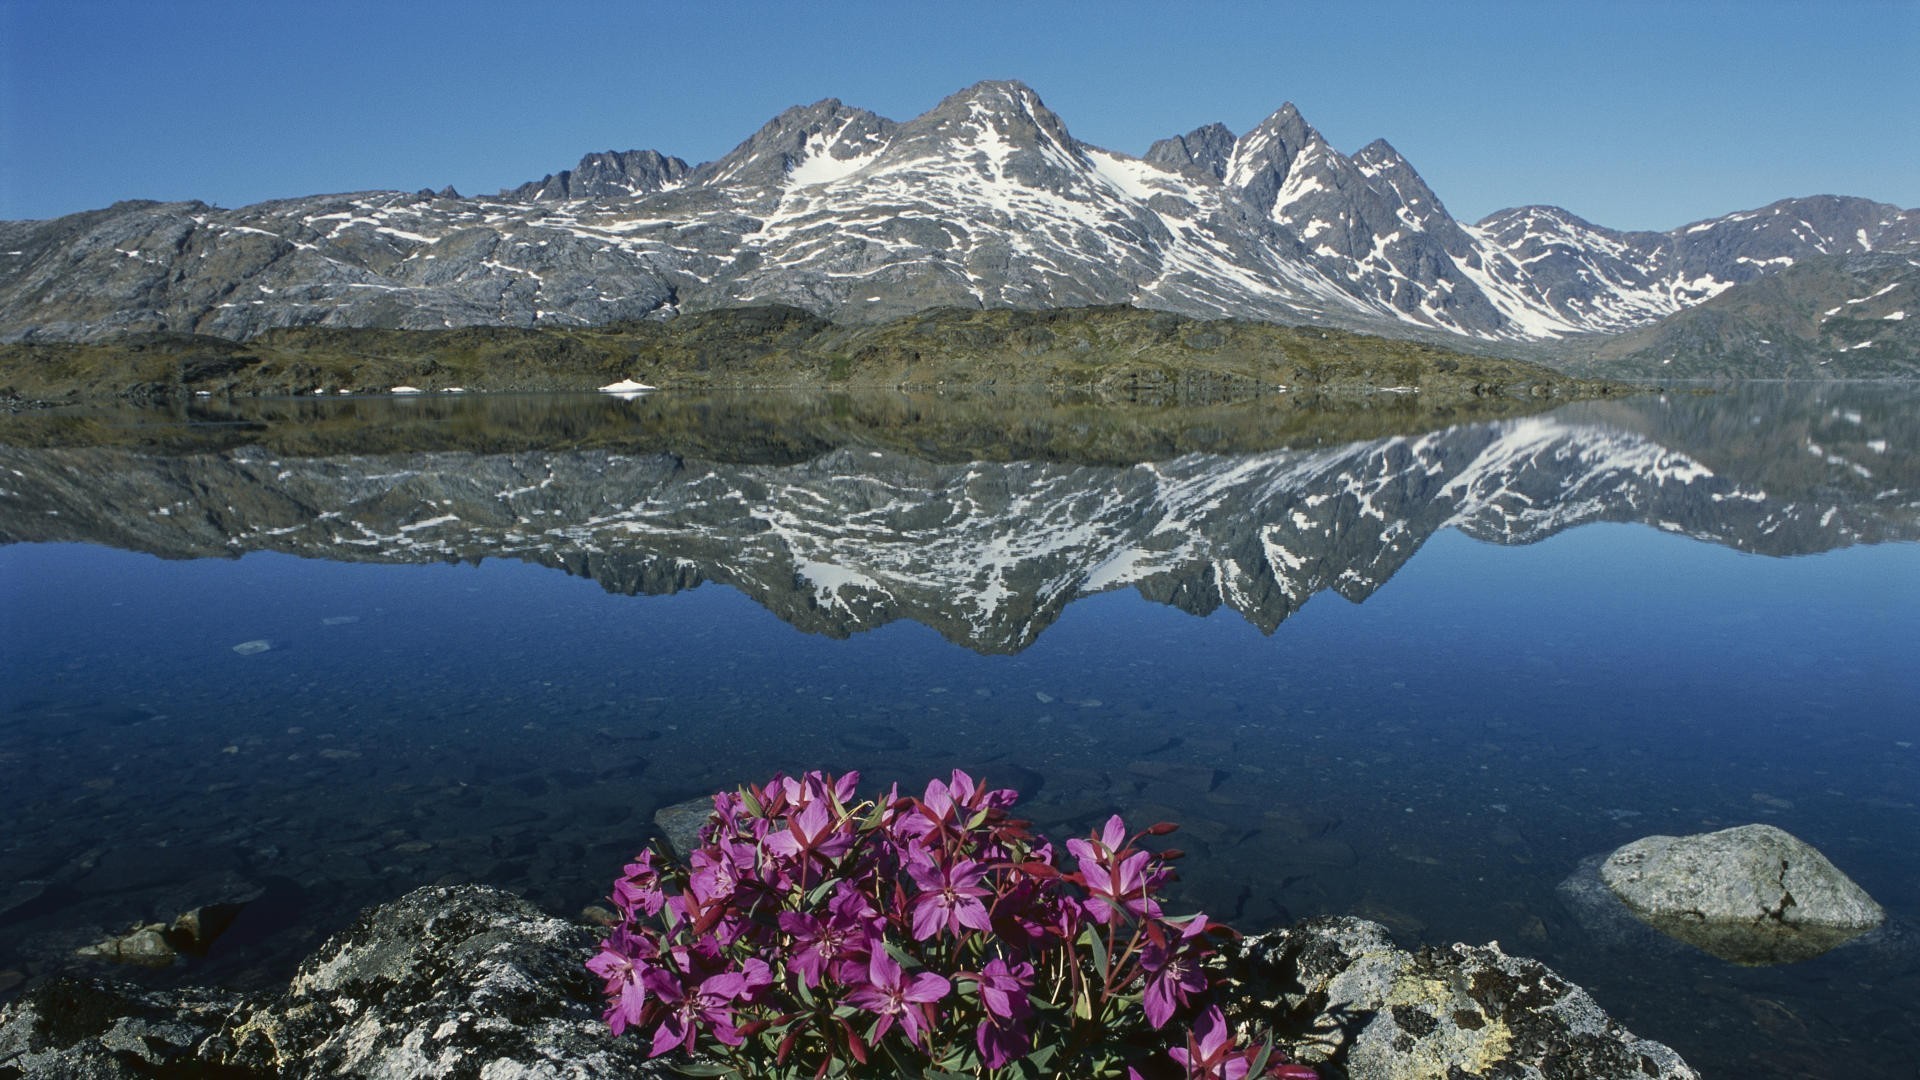 General 1920x1080 nature landscape mountains Greenland water lake snow flowers stones reflection rocks nordic landscapes plants